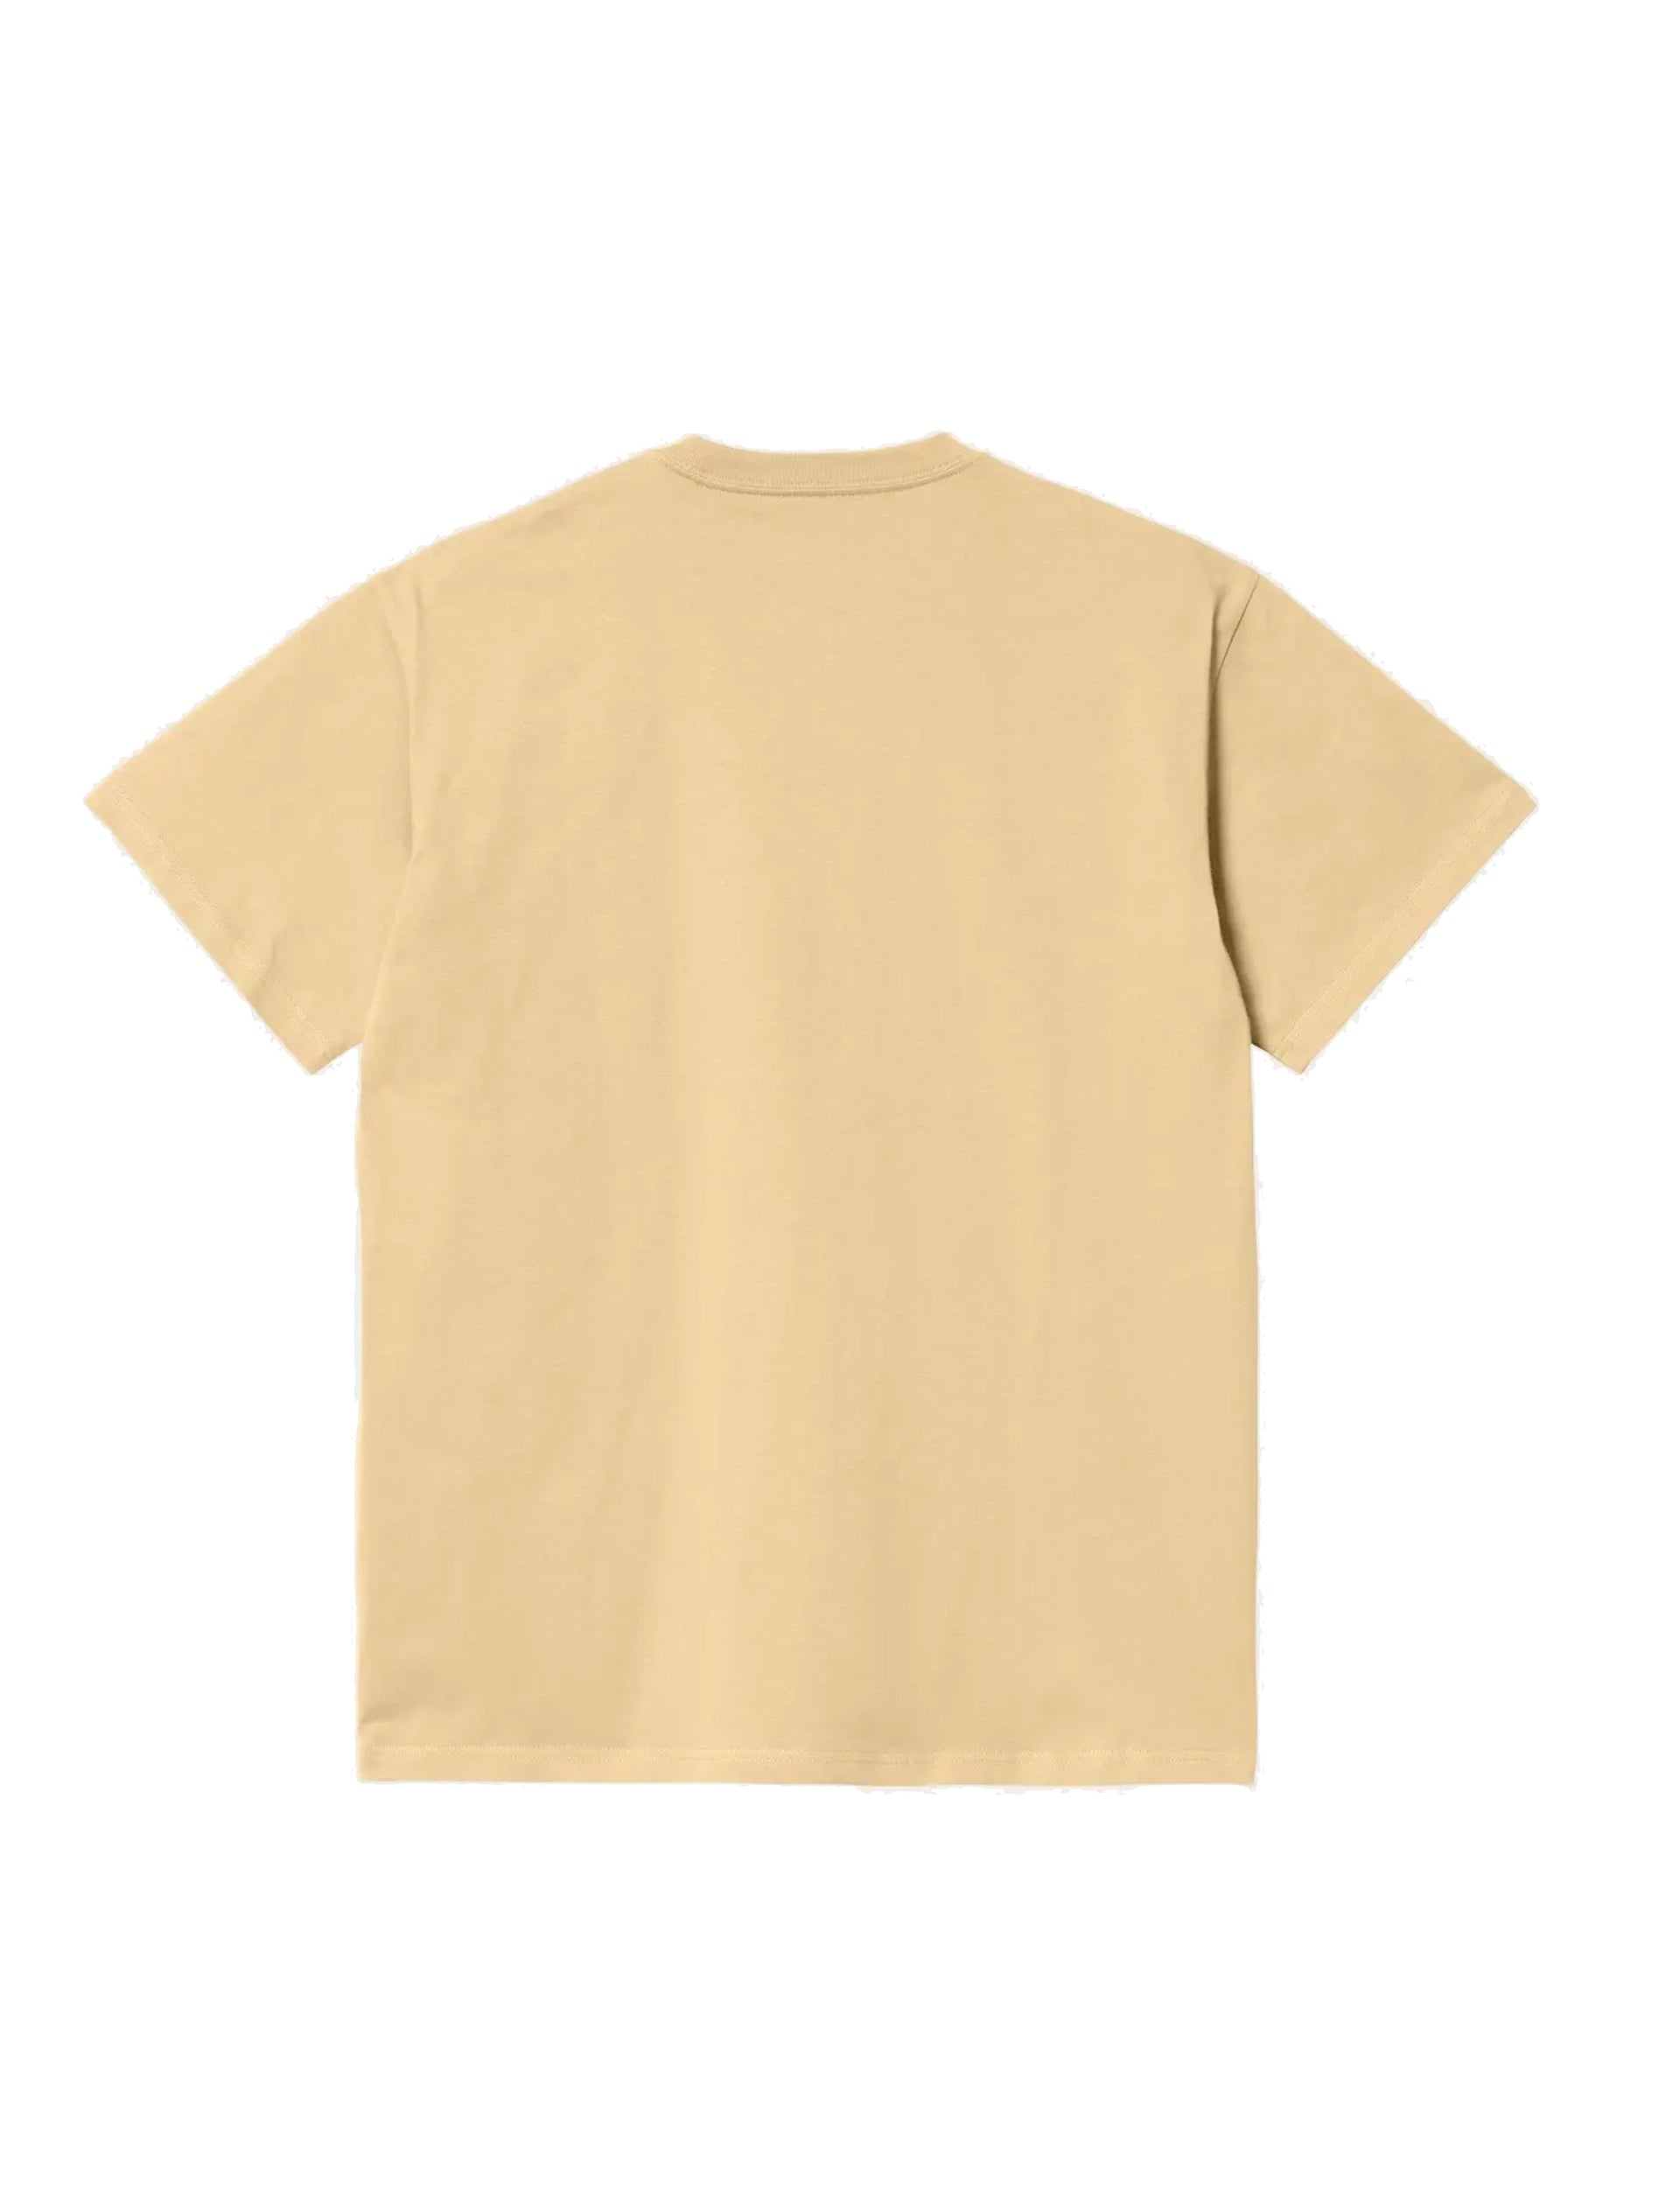 CARHARTT WIP S/S CHASE T-SHIRT CITRON